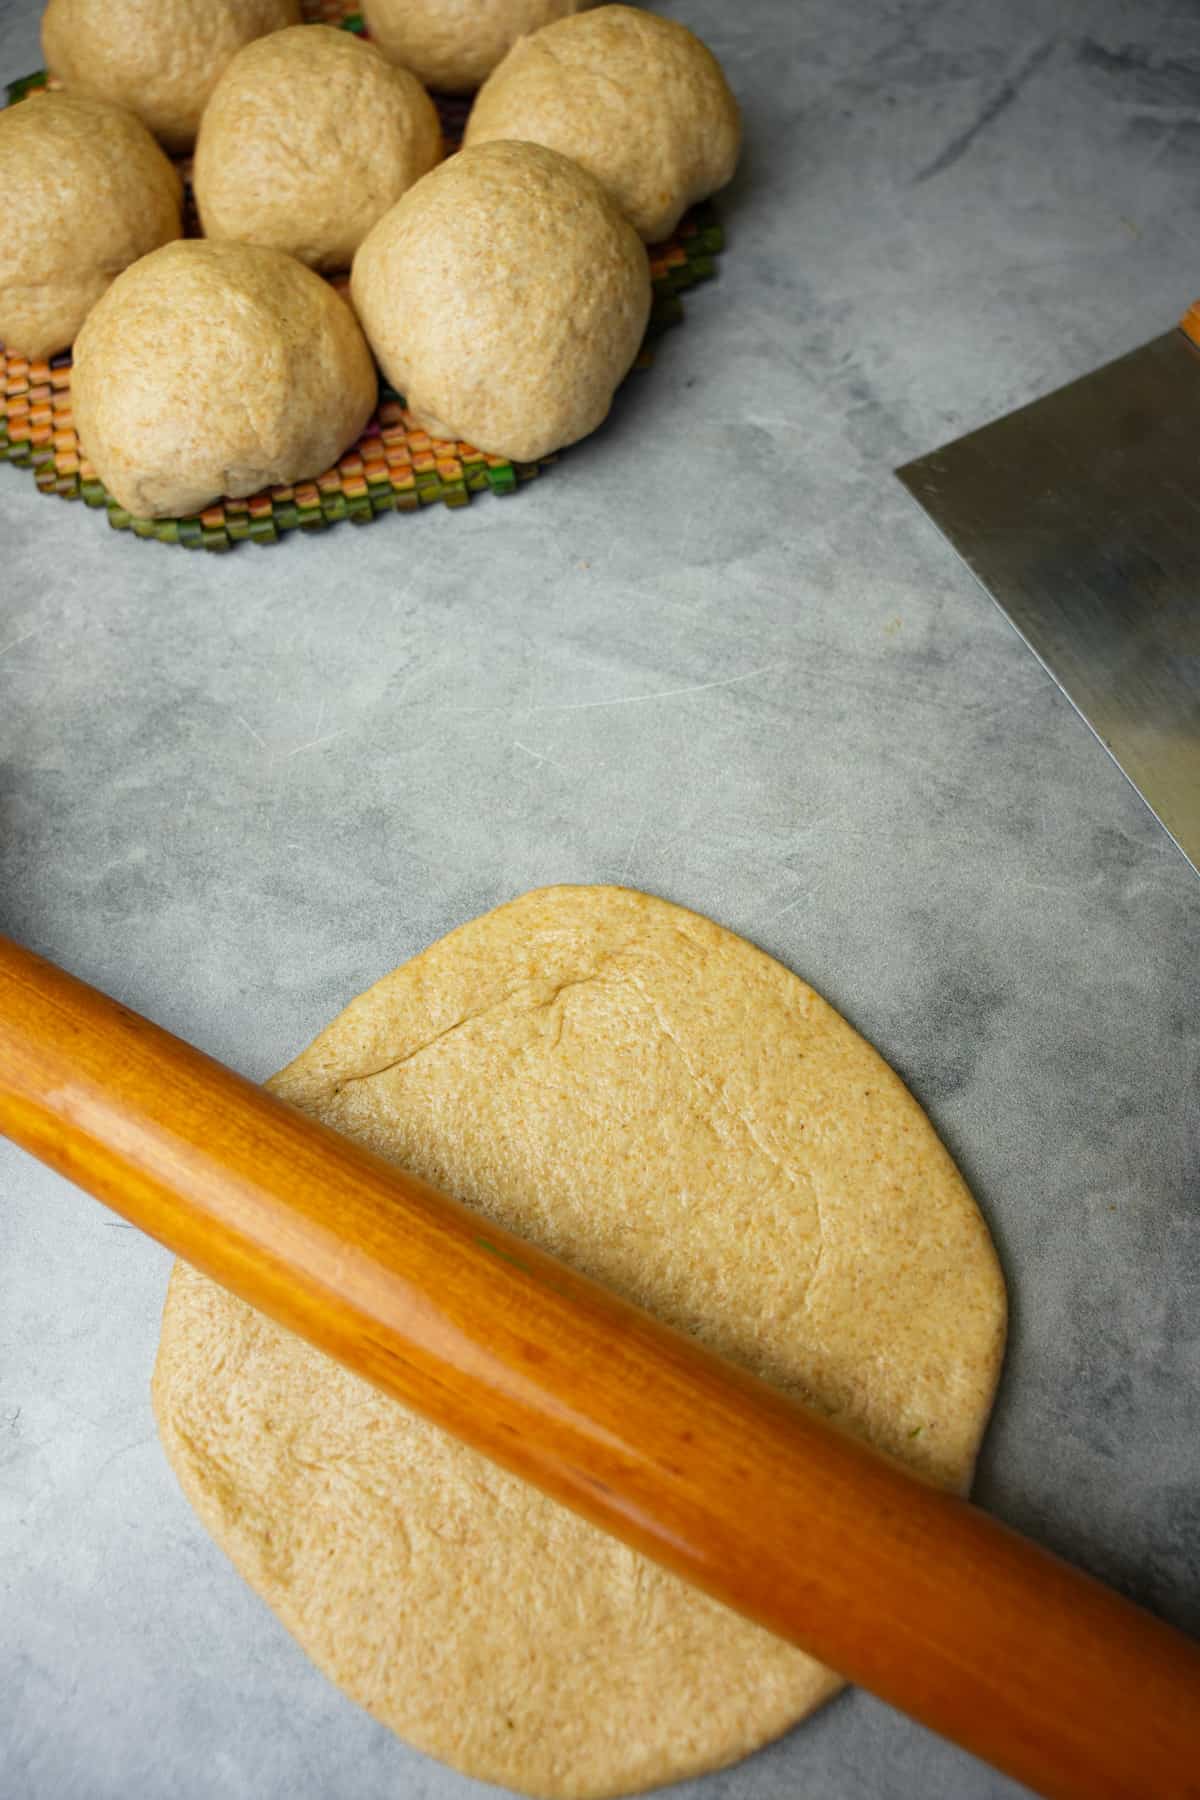 Rolling out a single portion of dough with a wooden rolling pin. Additional rounded dough can be seen in the background on a mat.